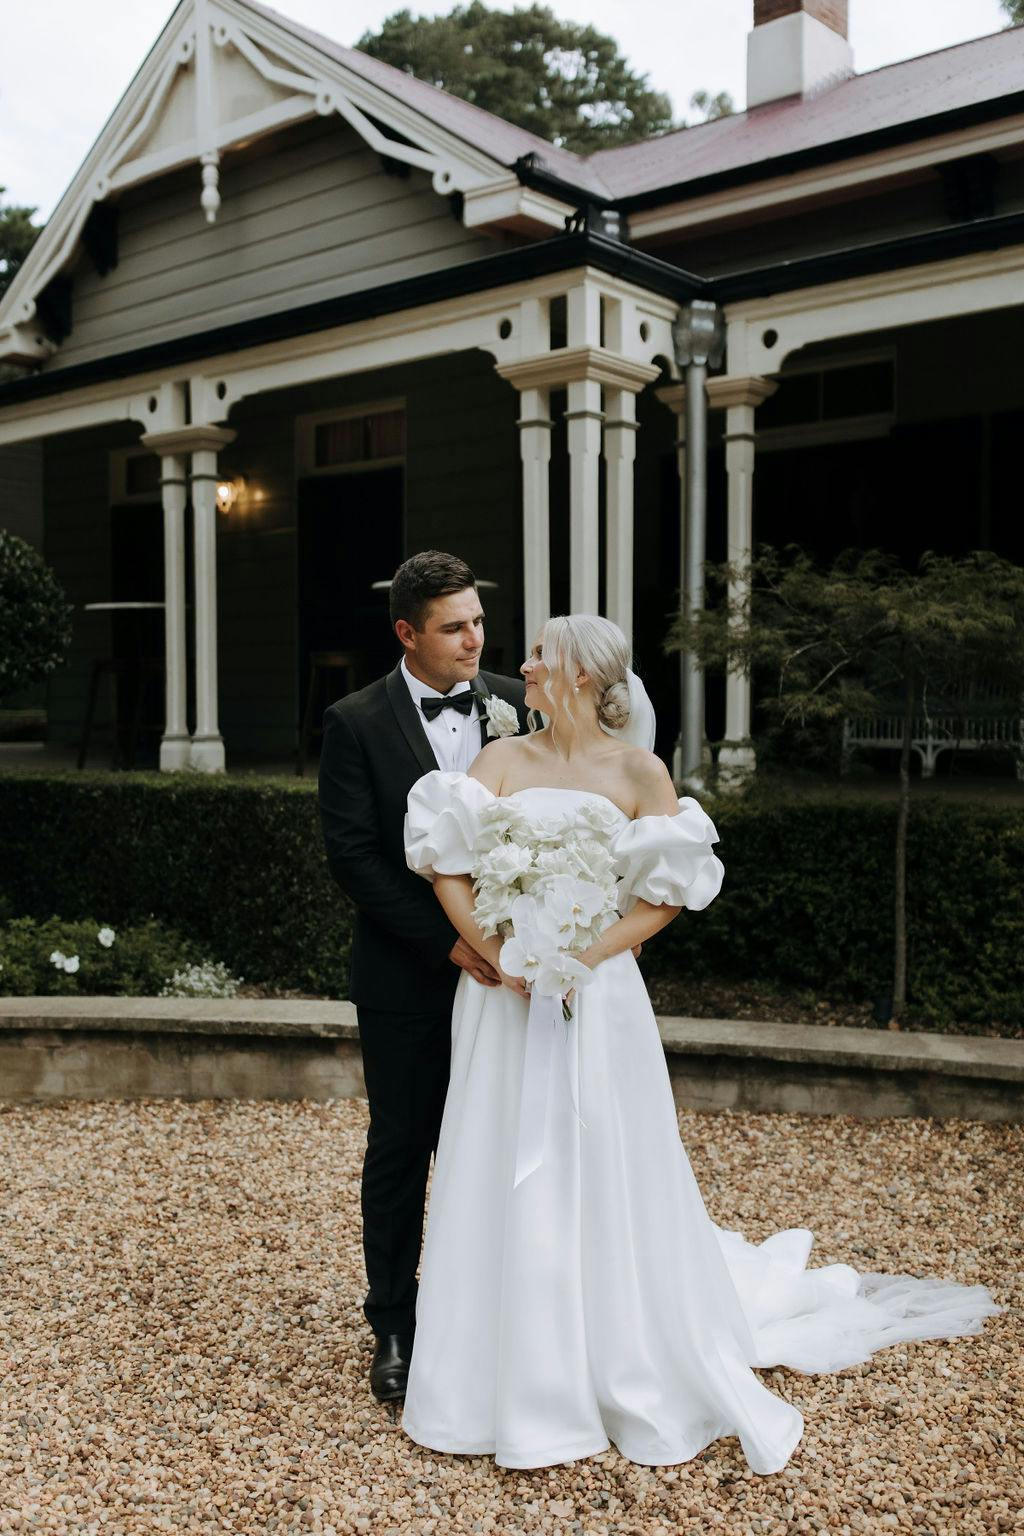 A bride in an off-shoulder white gown holding a bouquet stands next to a groom in a black tuxedo. They are gazing at each other lovingly. They are outside a large, rustic house with a porch and decorative columns, amidst a gravel courtyard and greenery.